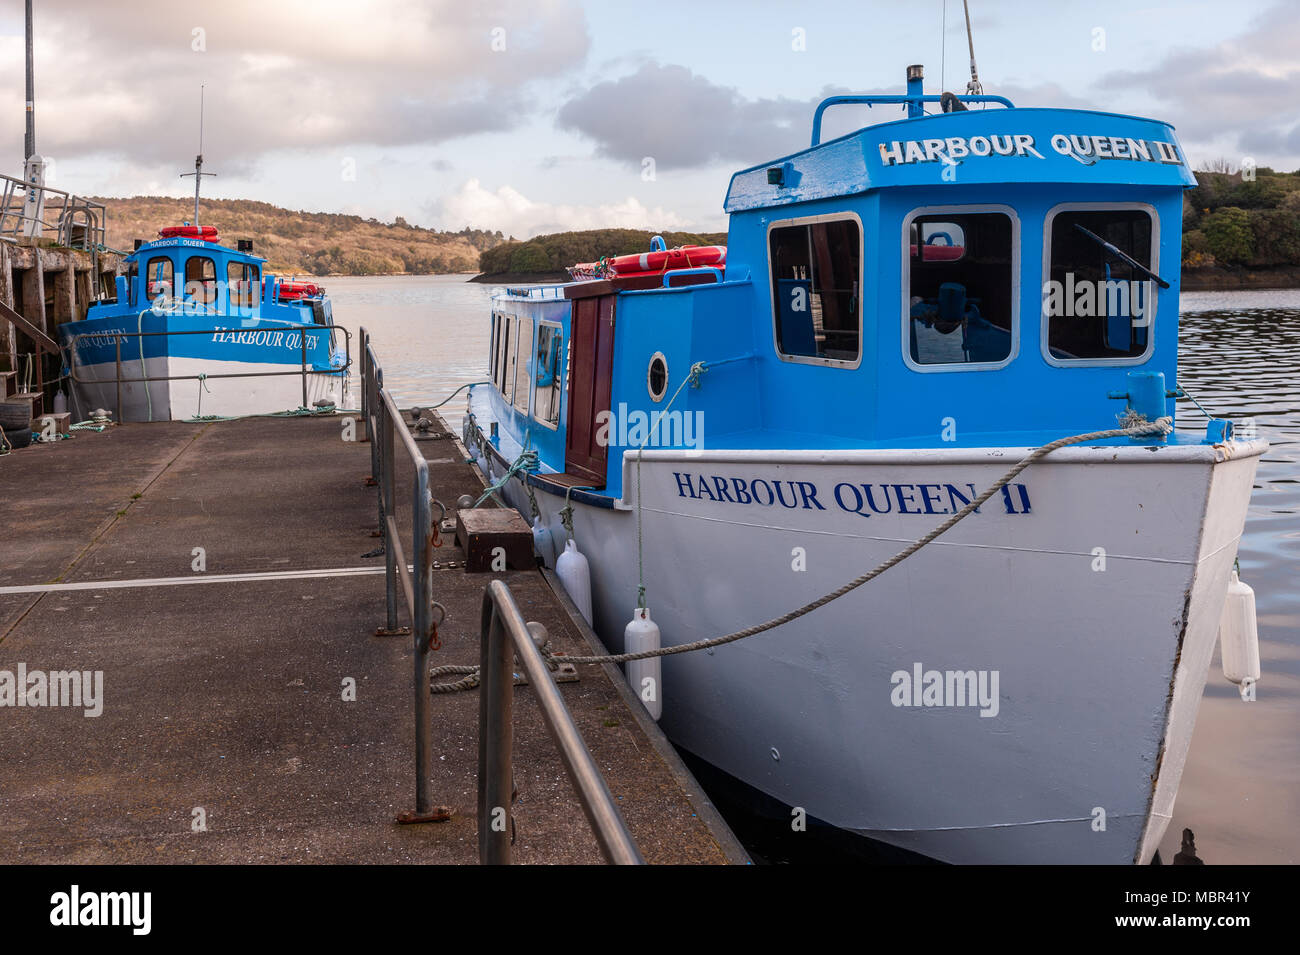 Glengarriff to Garnish Island passenger boats Harbour Queen 1 and 2 moored at Glengarriff Harbour, Glengarriff, County Cork, Ireland with copy space. Stock Photo